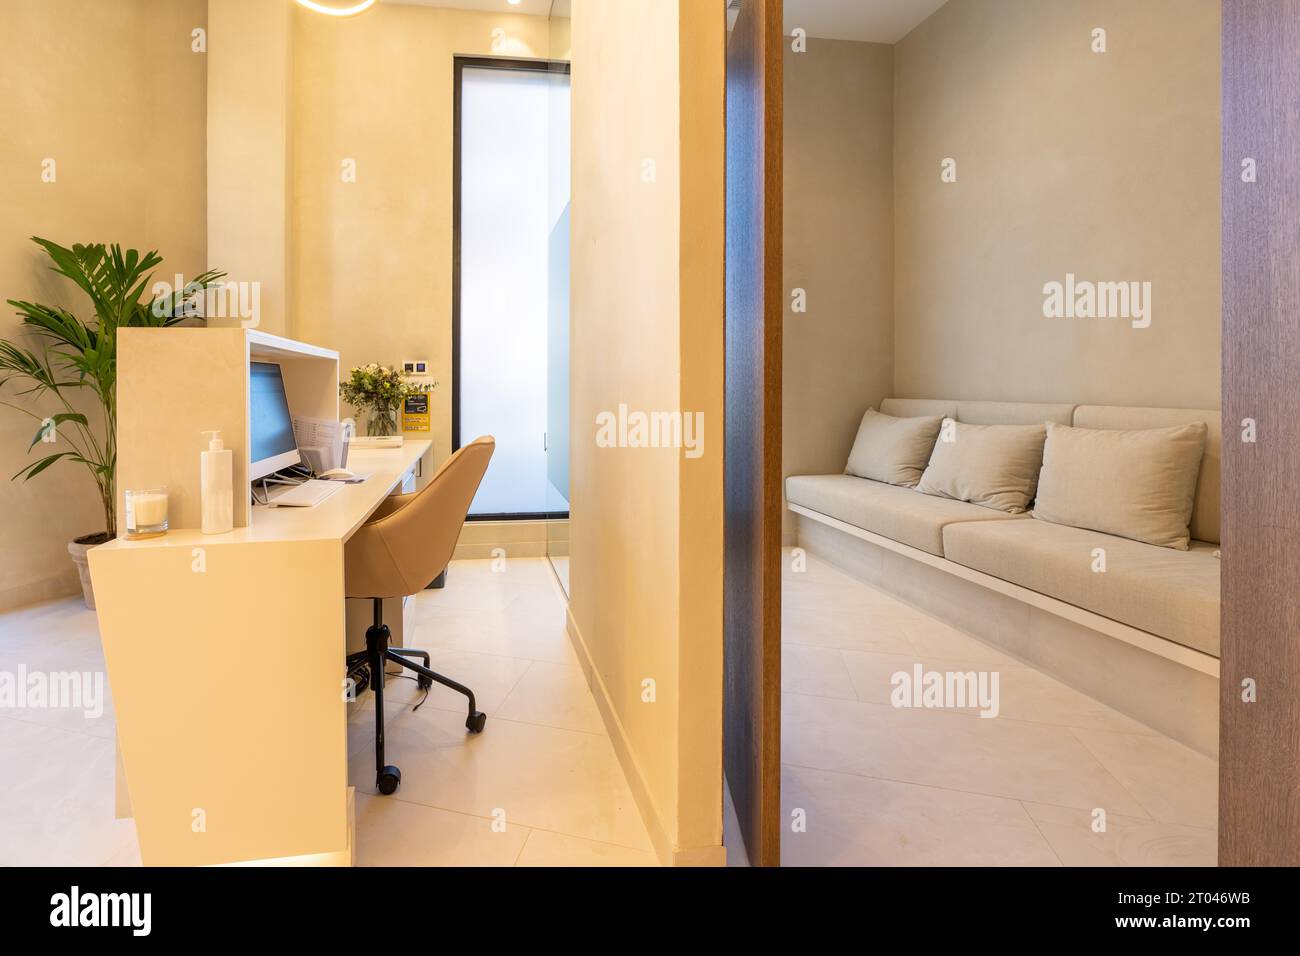 Interior design of a reception and waiting area in a dental clinic Stock Photo